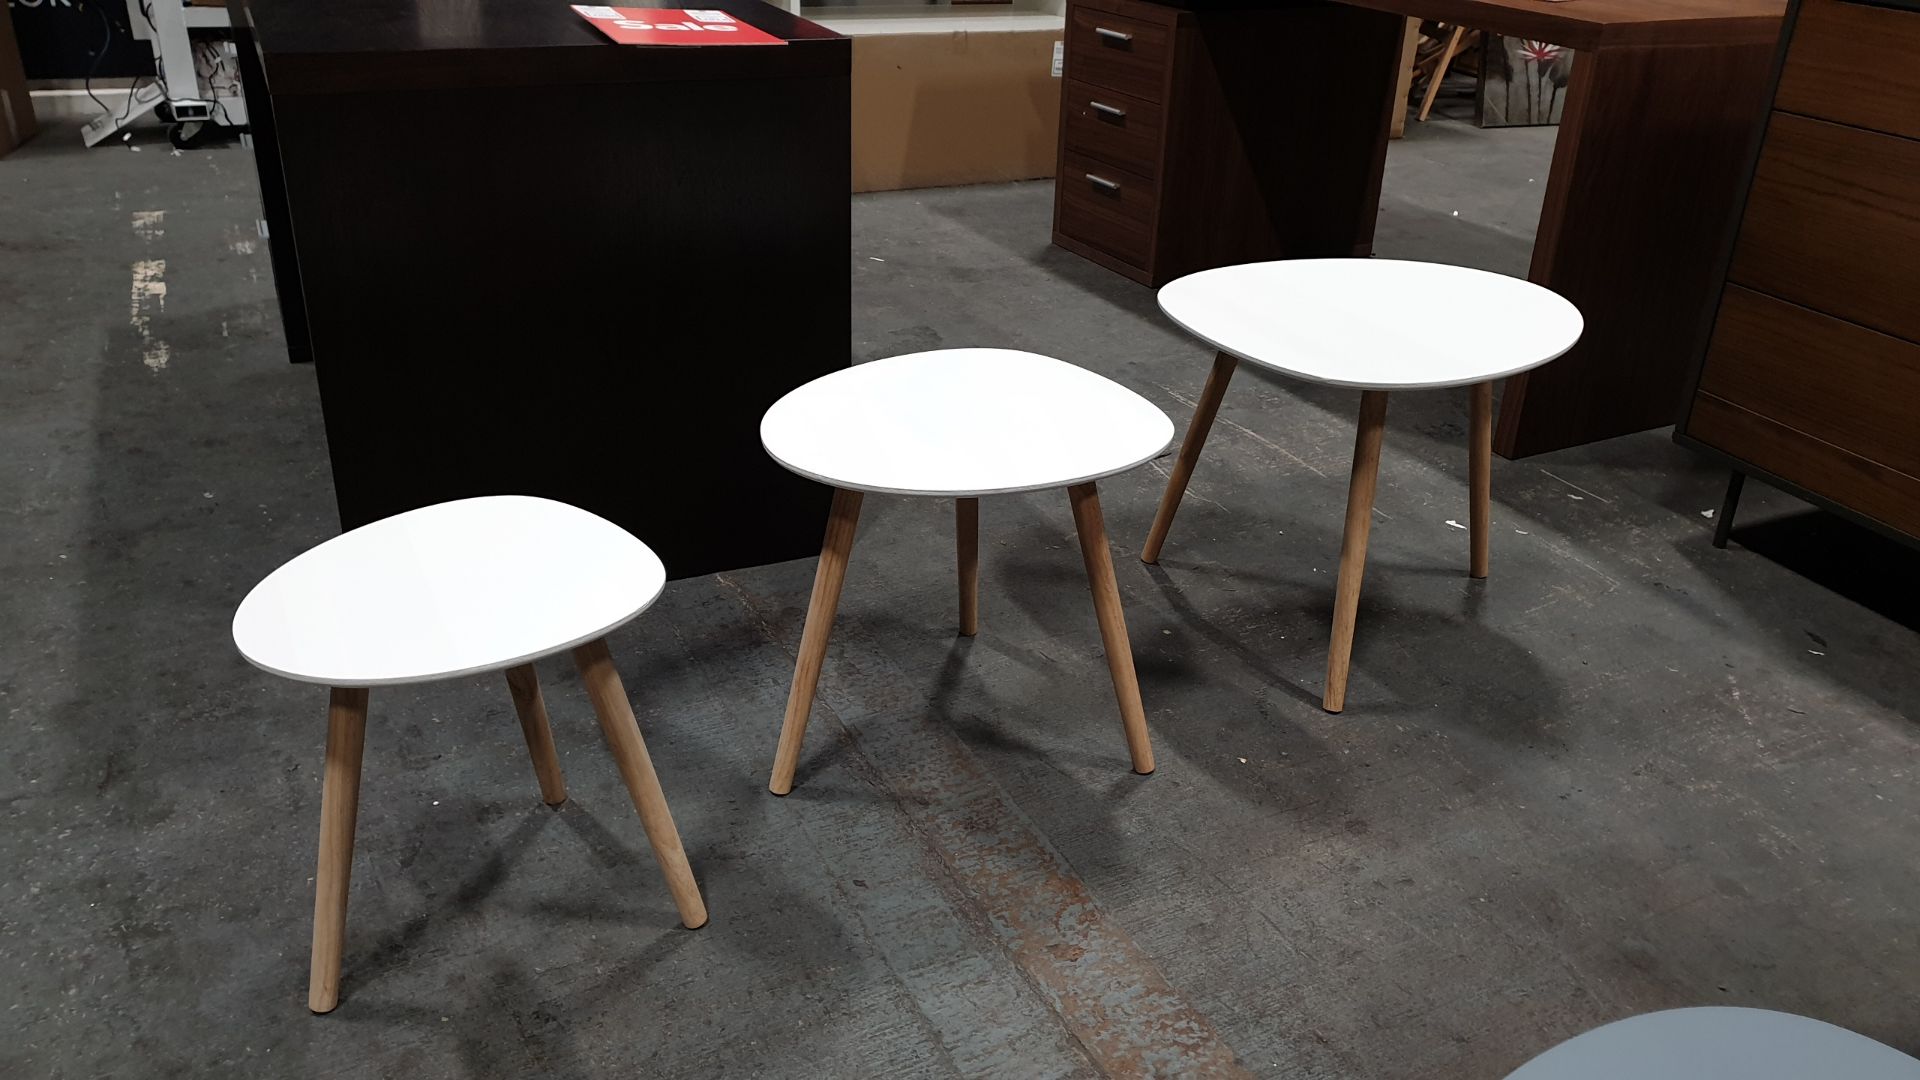 6 X BRAND NEW (CHARLES JACOBS) SET'S OF 3 NESTING TABLE'S IN WHITE (PRODUCT CODE - (CJ-NST-001-WHI)